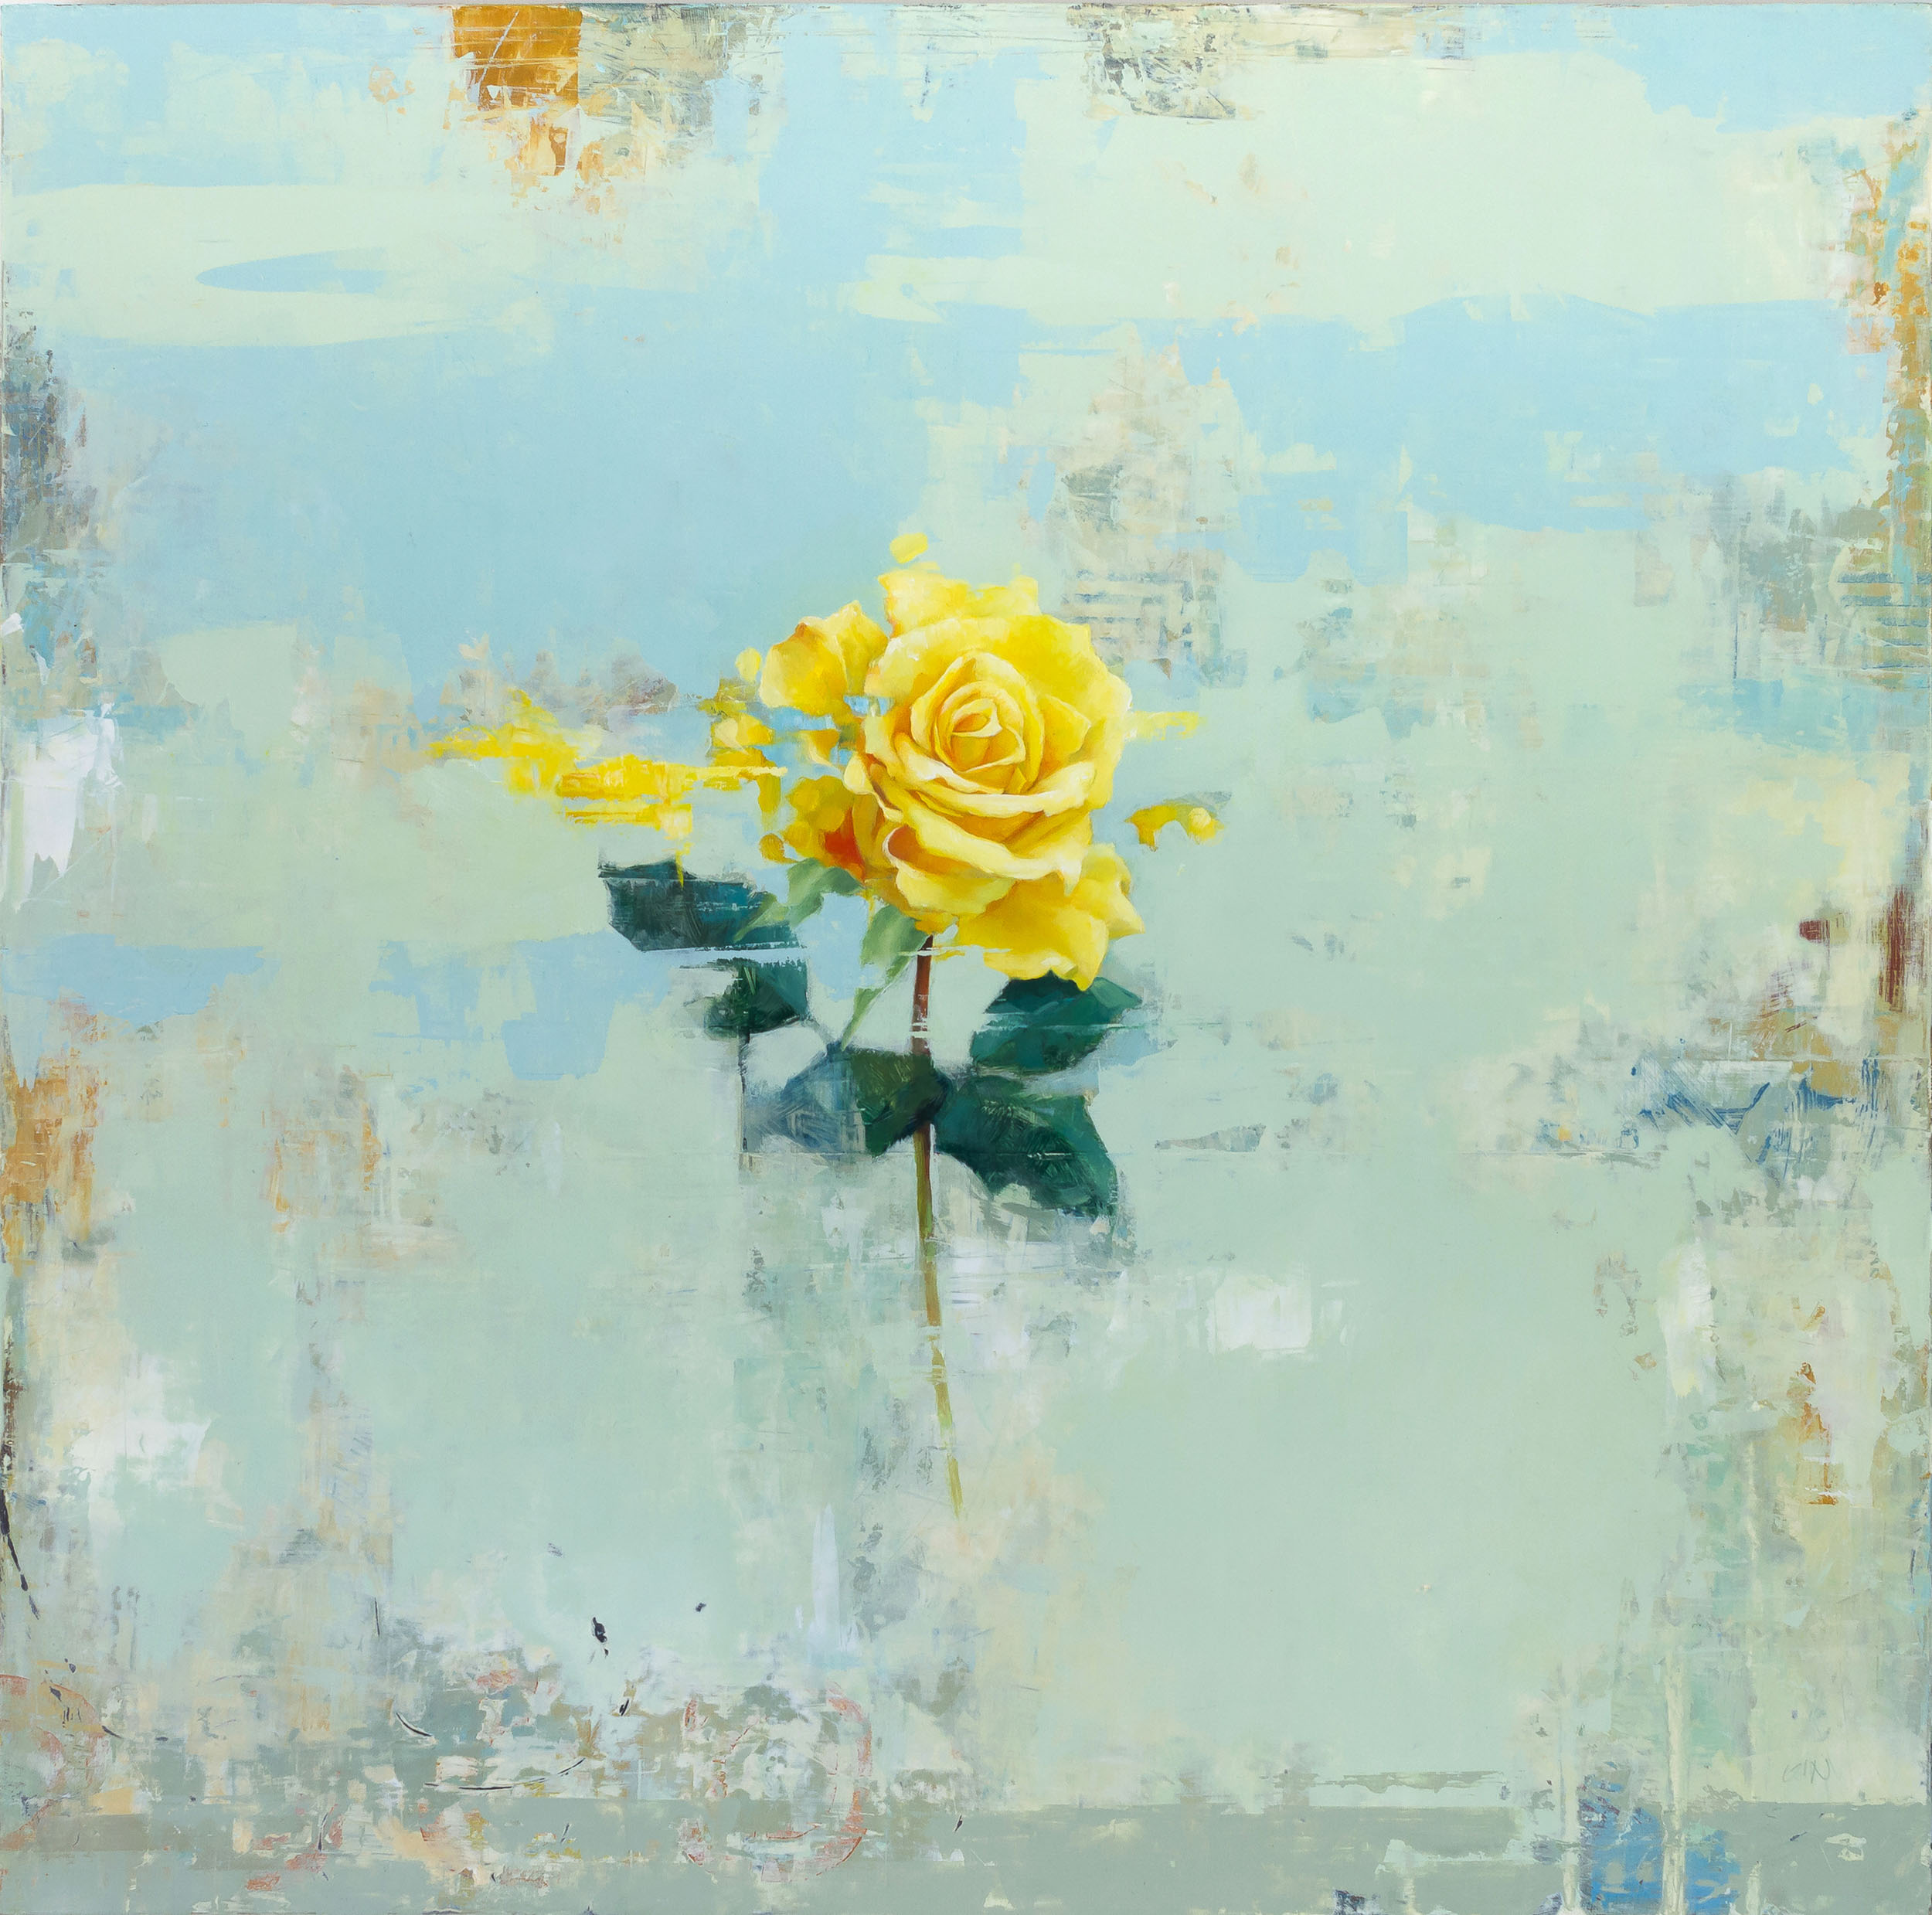   Yellow Rose  2019 oil on panel 20 x 20 inches  Private Collection 